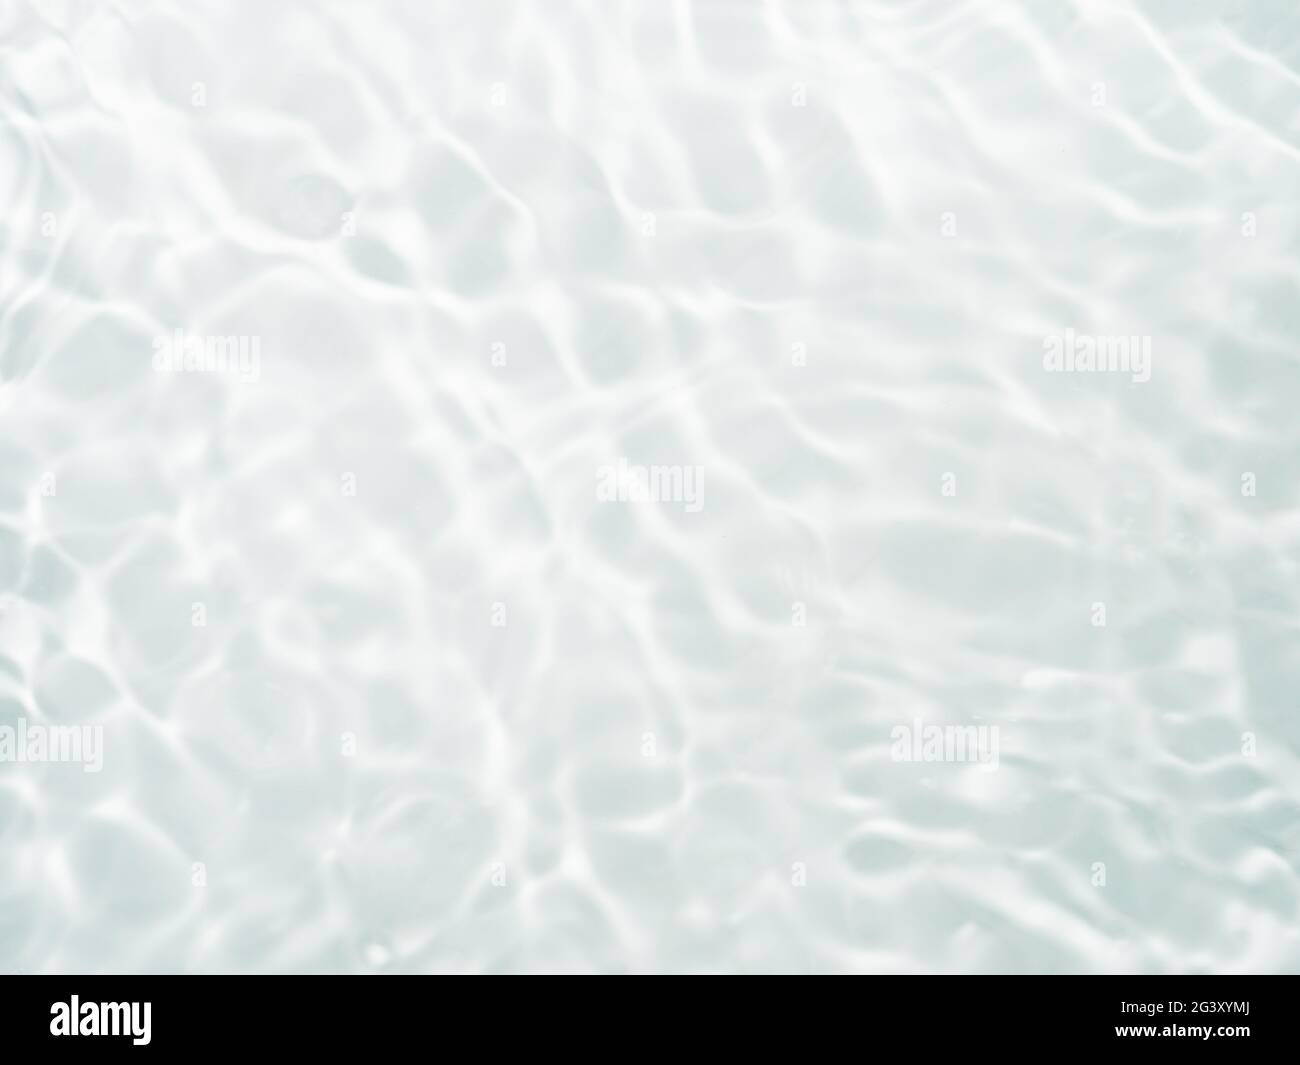 Blurry Water/Textures